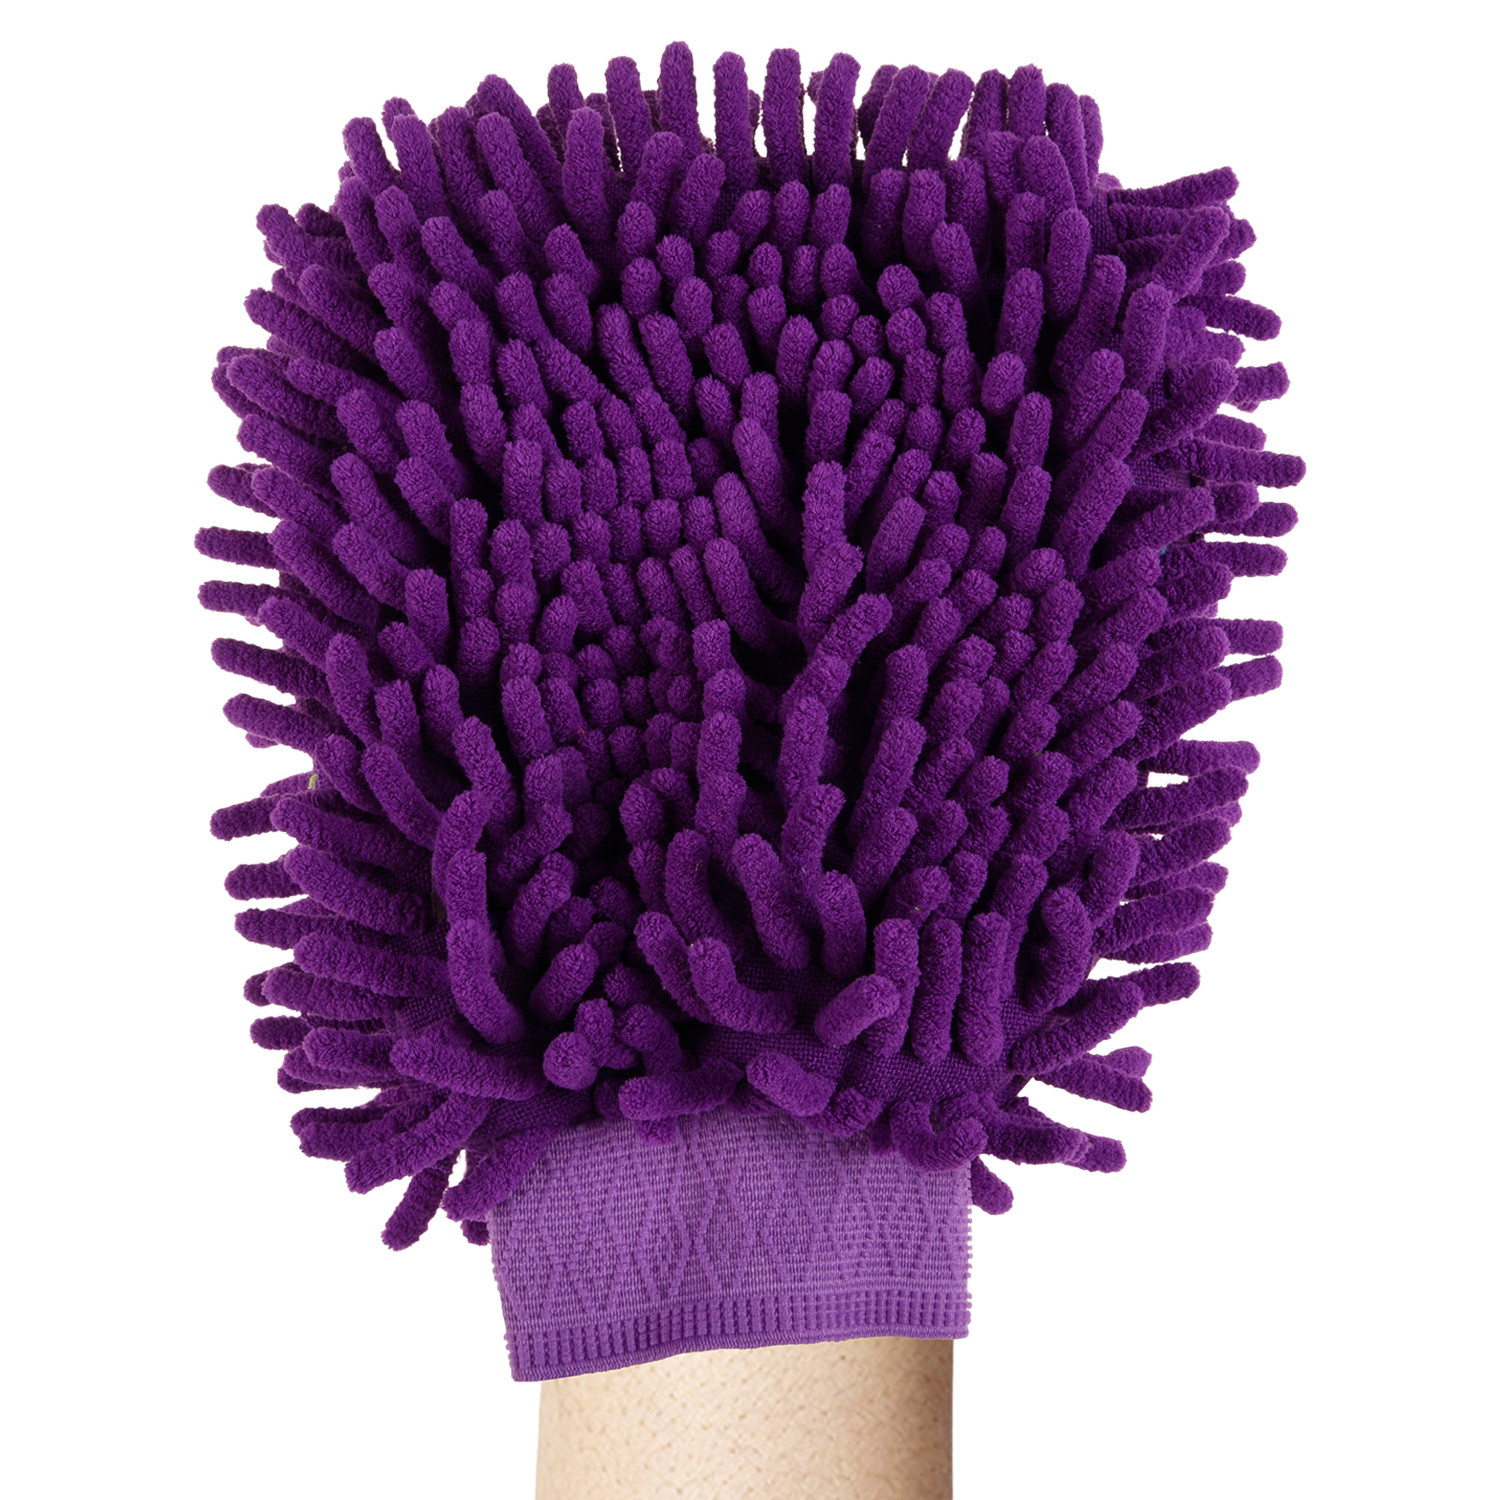 Kuber Industries Chenille Mitts|Microfiber Cleaning Gloves|Inside Waterproof Cloth Gloves|100 Gram Weighted Hand Duster|Hand Chenille Gloves For Car|Glass (Purple)